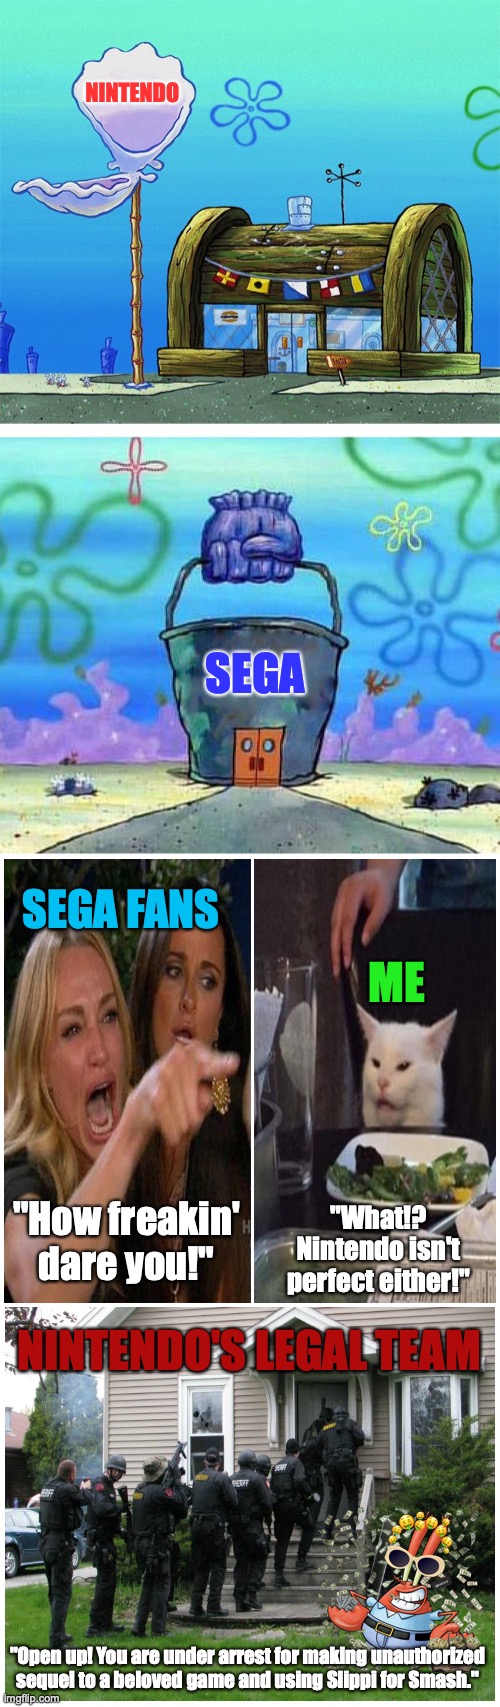 Nintendo vs Sega (please look at the entire meme) | NINTENDO; SEGA; SEGA FANS; ME; "How freakin' dare you!"; "What!? Nintendo isn't perfect either!"; NINTENDO'S LEGAL TEAM; "Open up! You are under arrest for making unauthorized sequel to a beloved game and using Slippi for Smash." | image tagged in memes,krusty krab vs chum bucket blank,nintendo,sega,lawyers,mr krabs | made w/ Imgflip meme maker